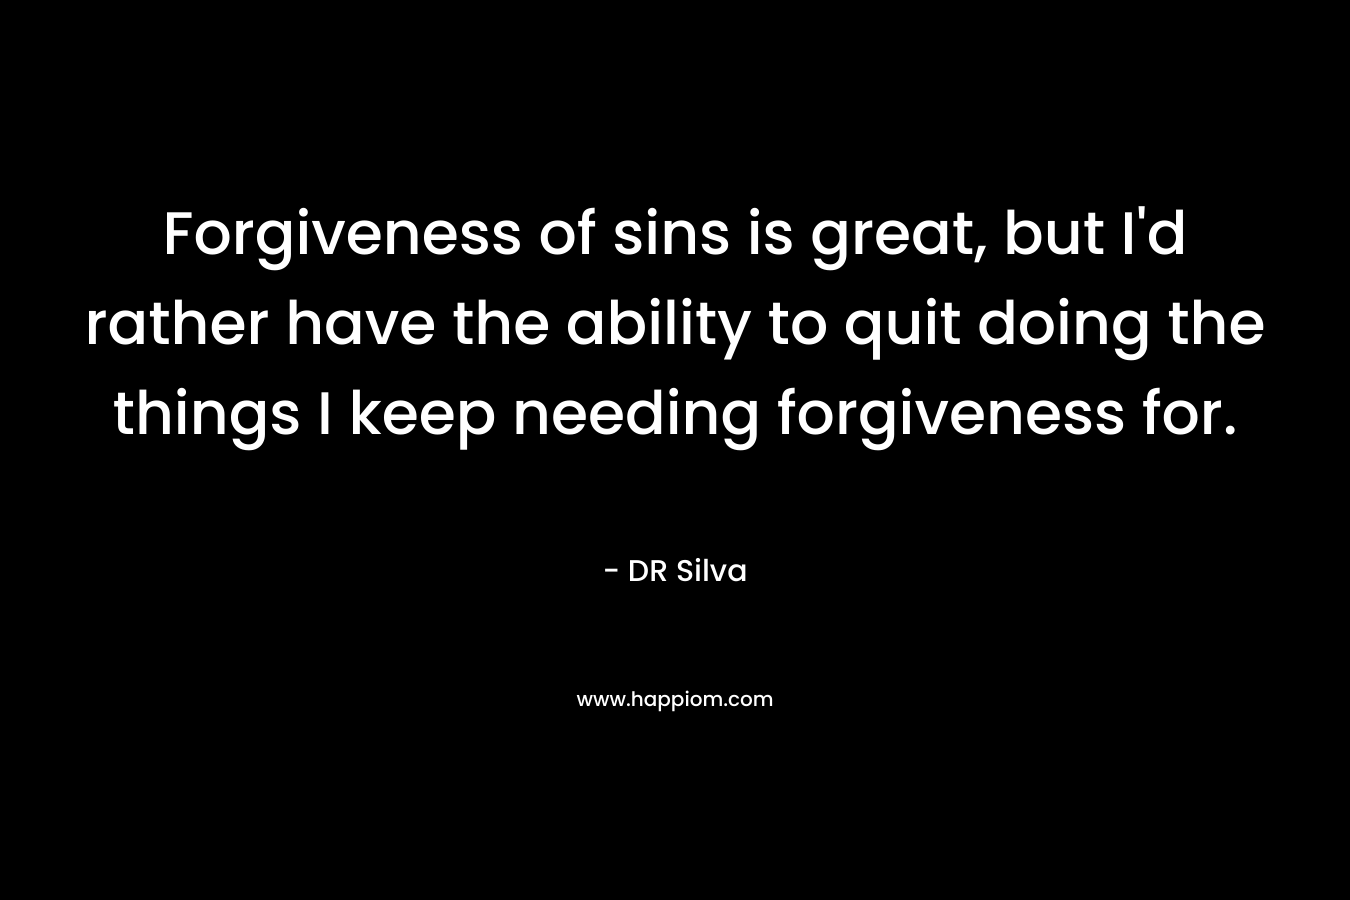 Forgiveness of sins is great, but I'd rather have the ability to quit doing the things I keep needing forgiveness for.